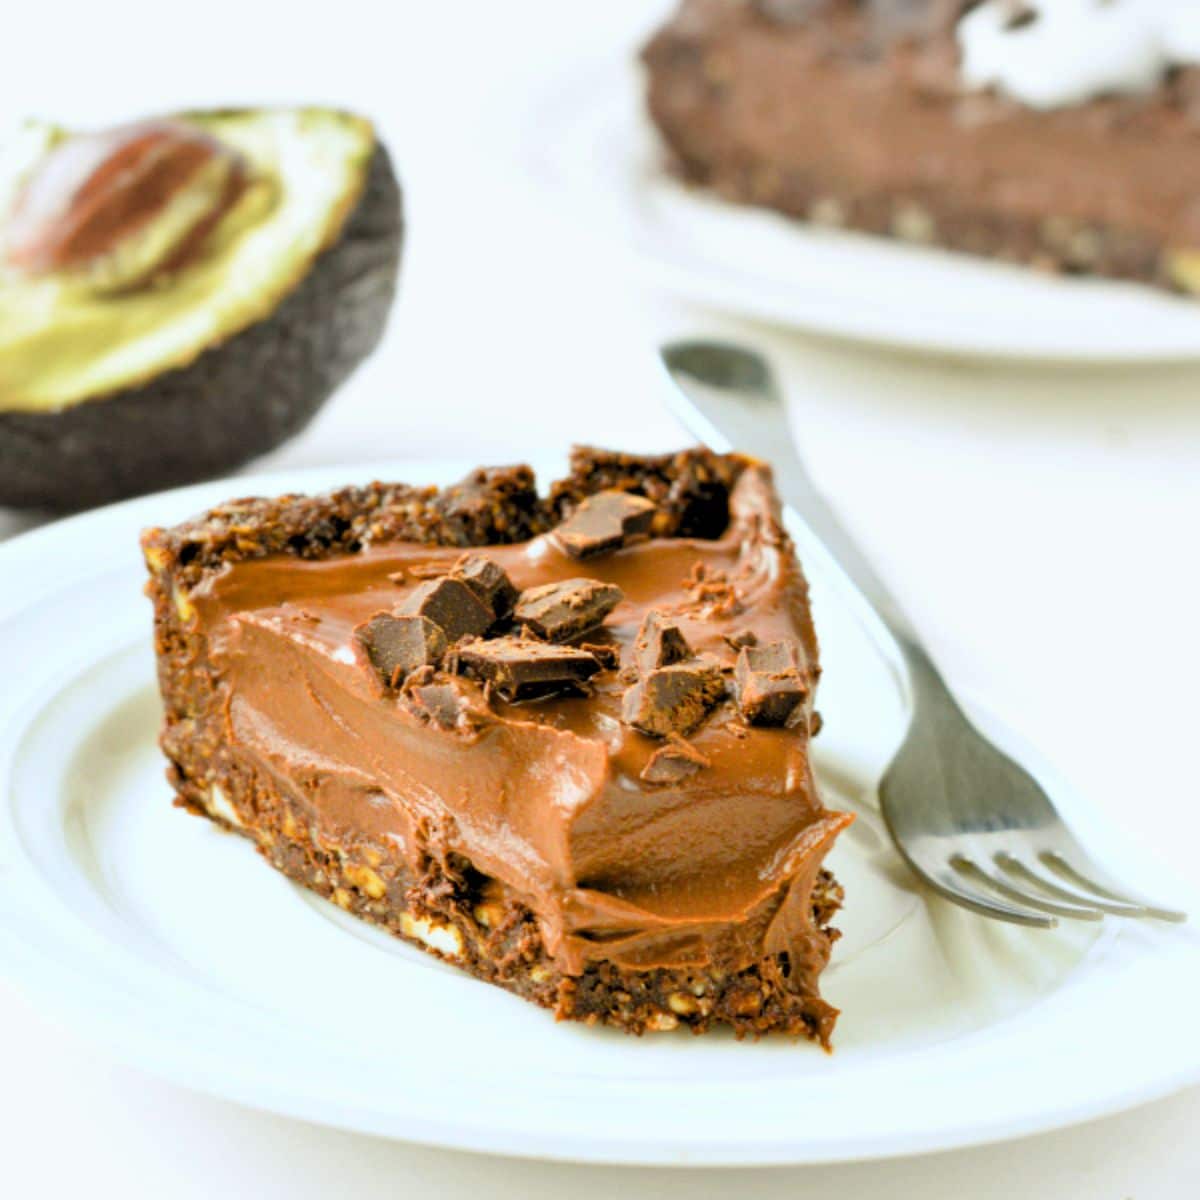 Chocolate Avocado Pie on a plate with a fork.